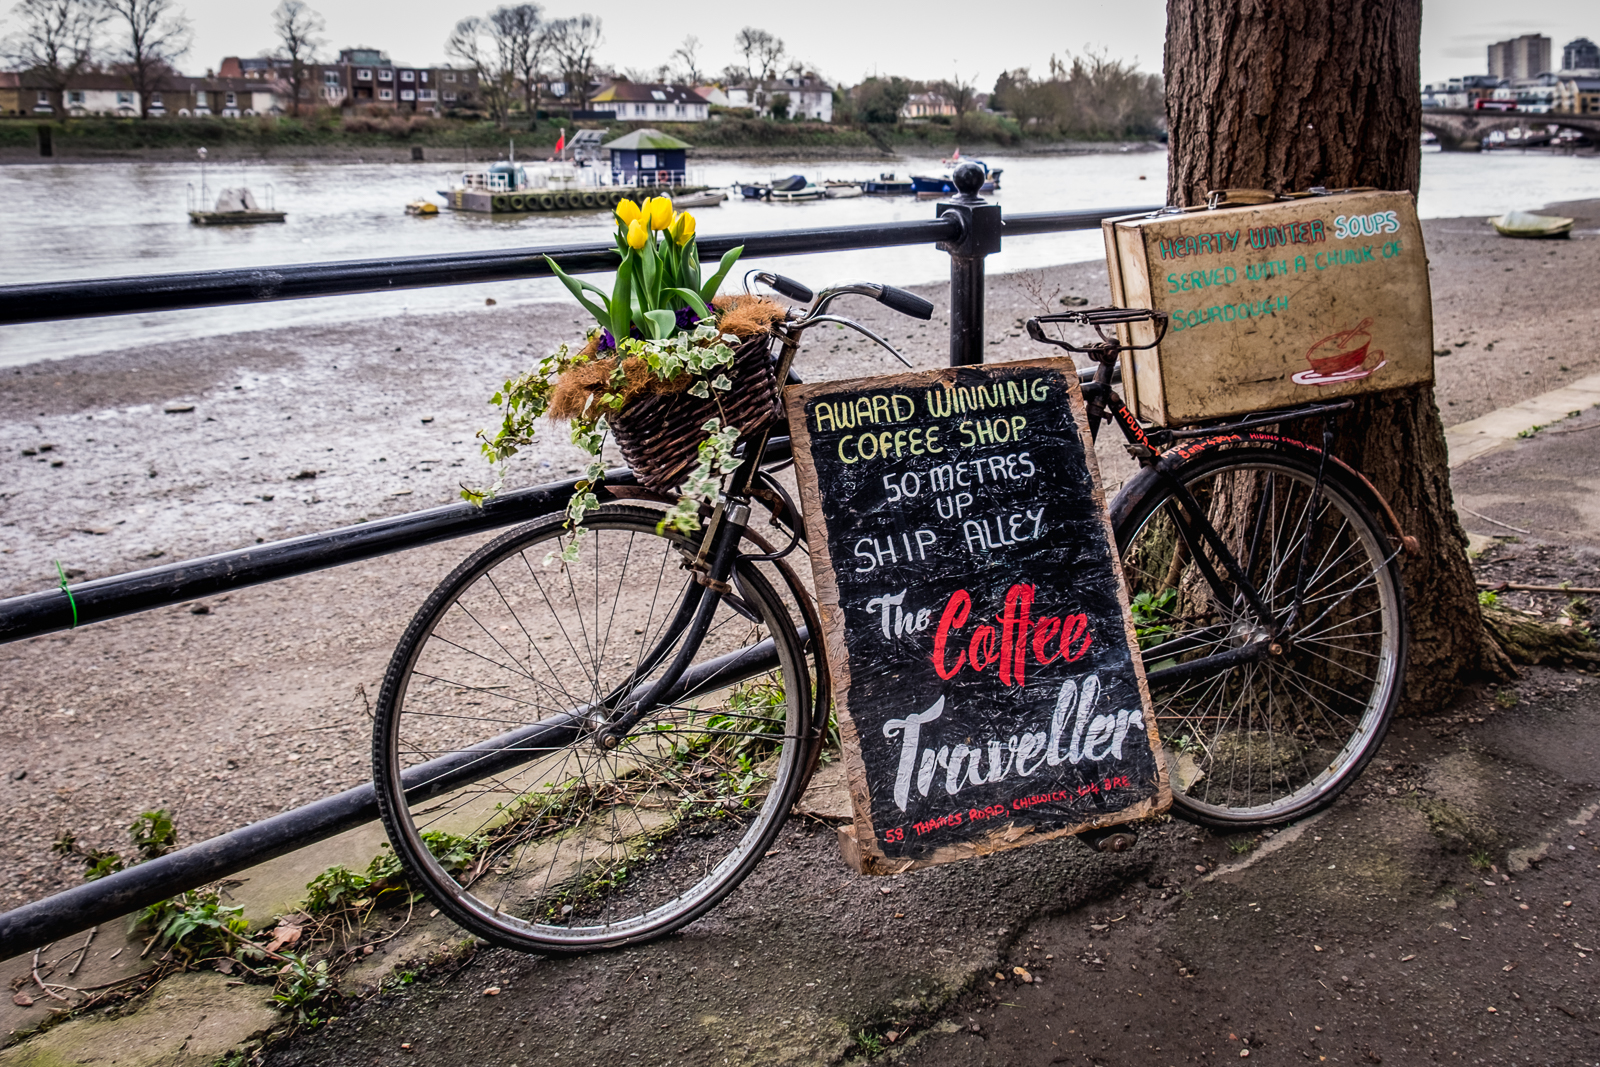 20170308_Hounslow_Strand-on-the-Green_Cafe-Advertisement